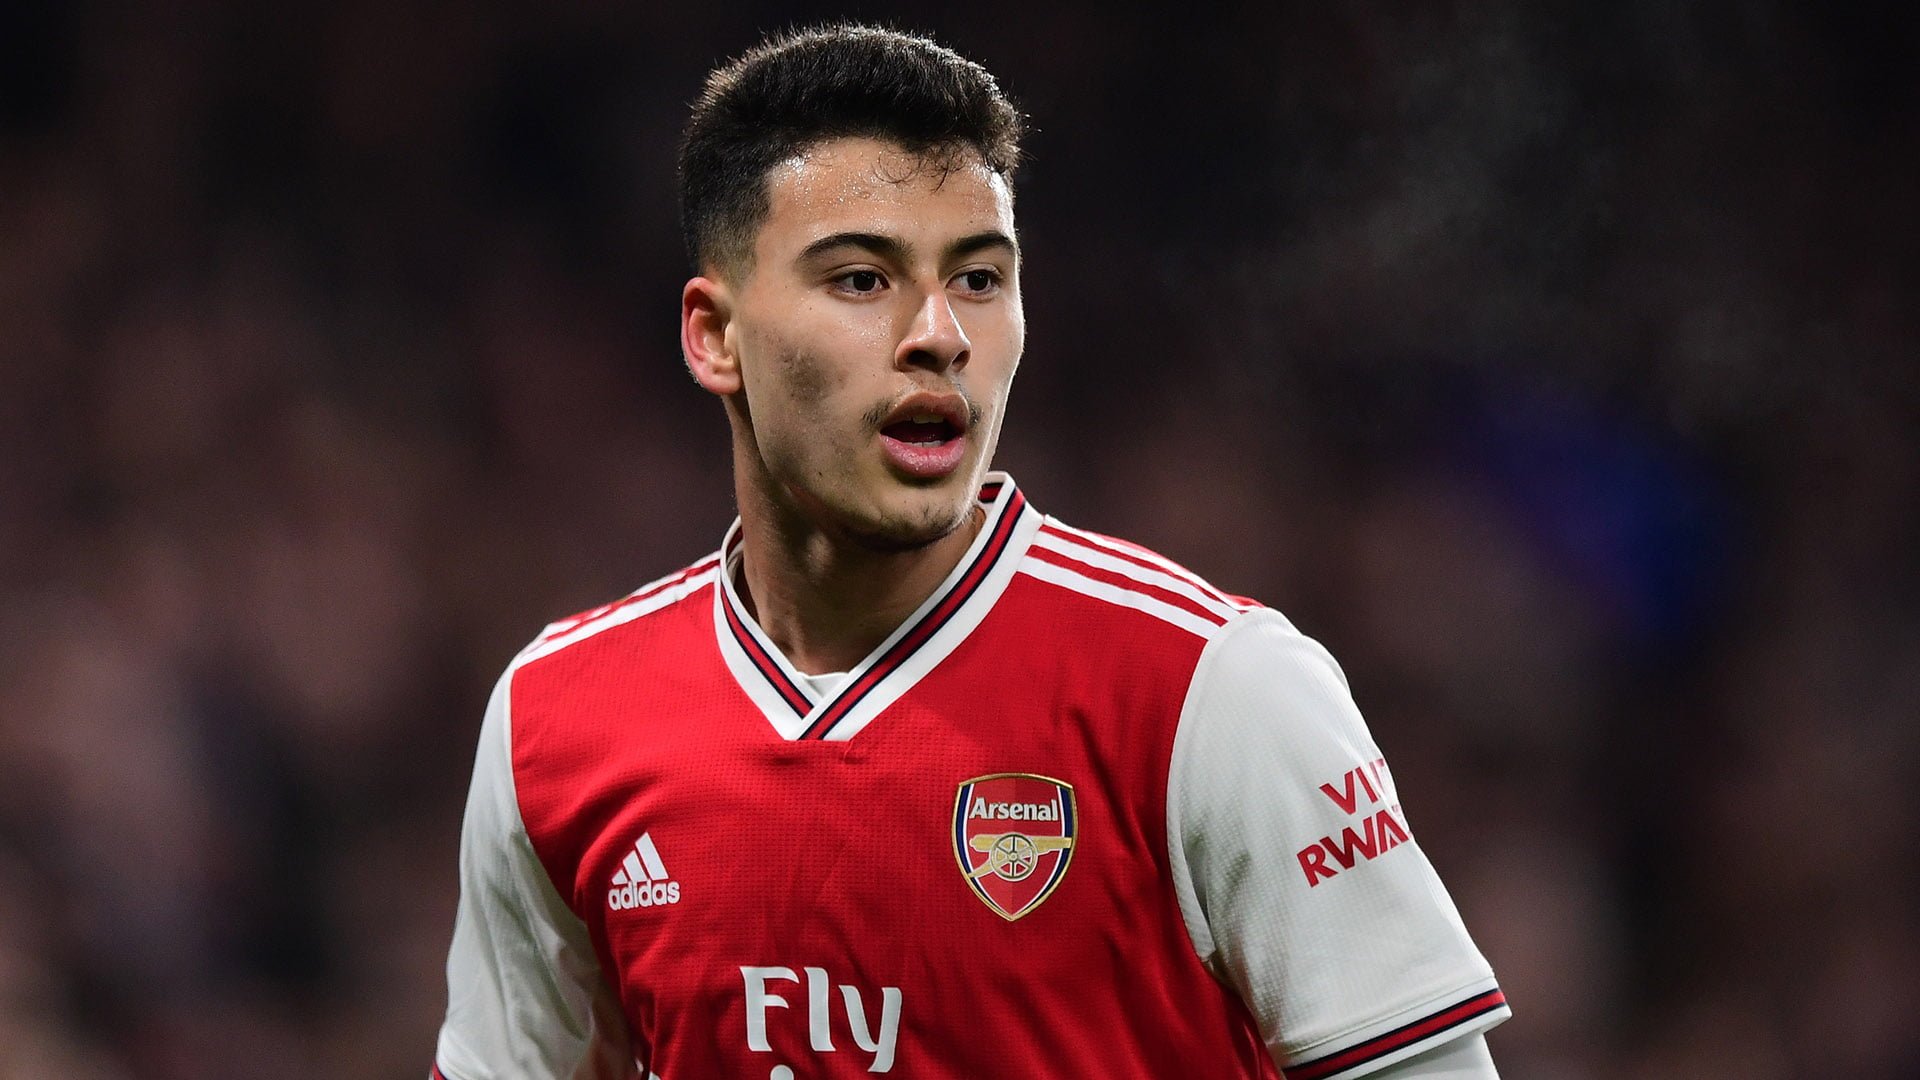 We Want to Win Titles With Arsenal—Gabriel Martinelli